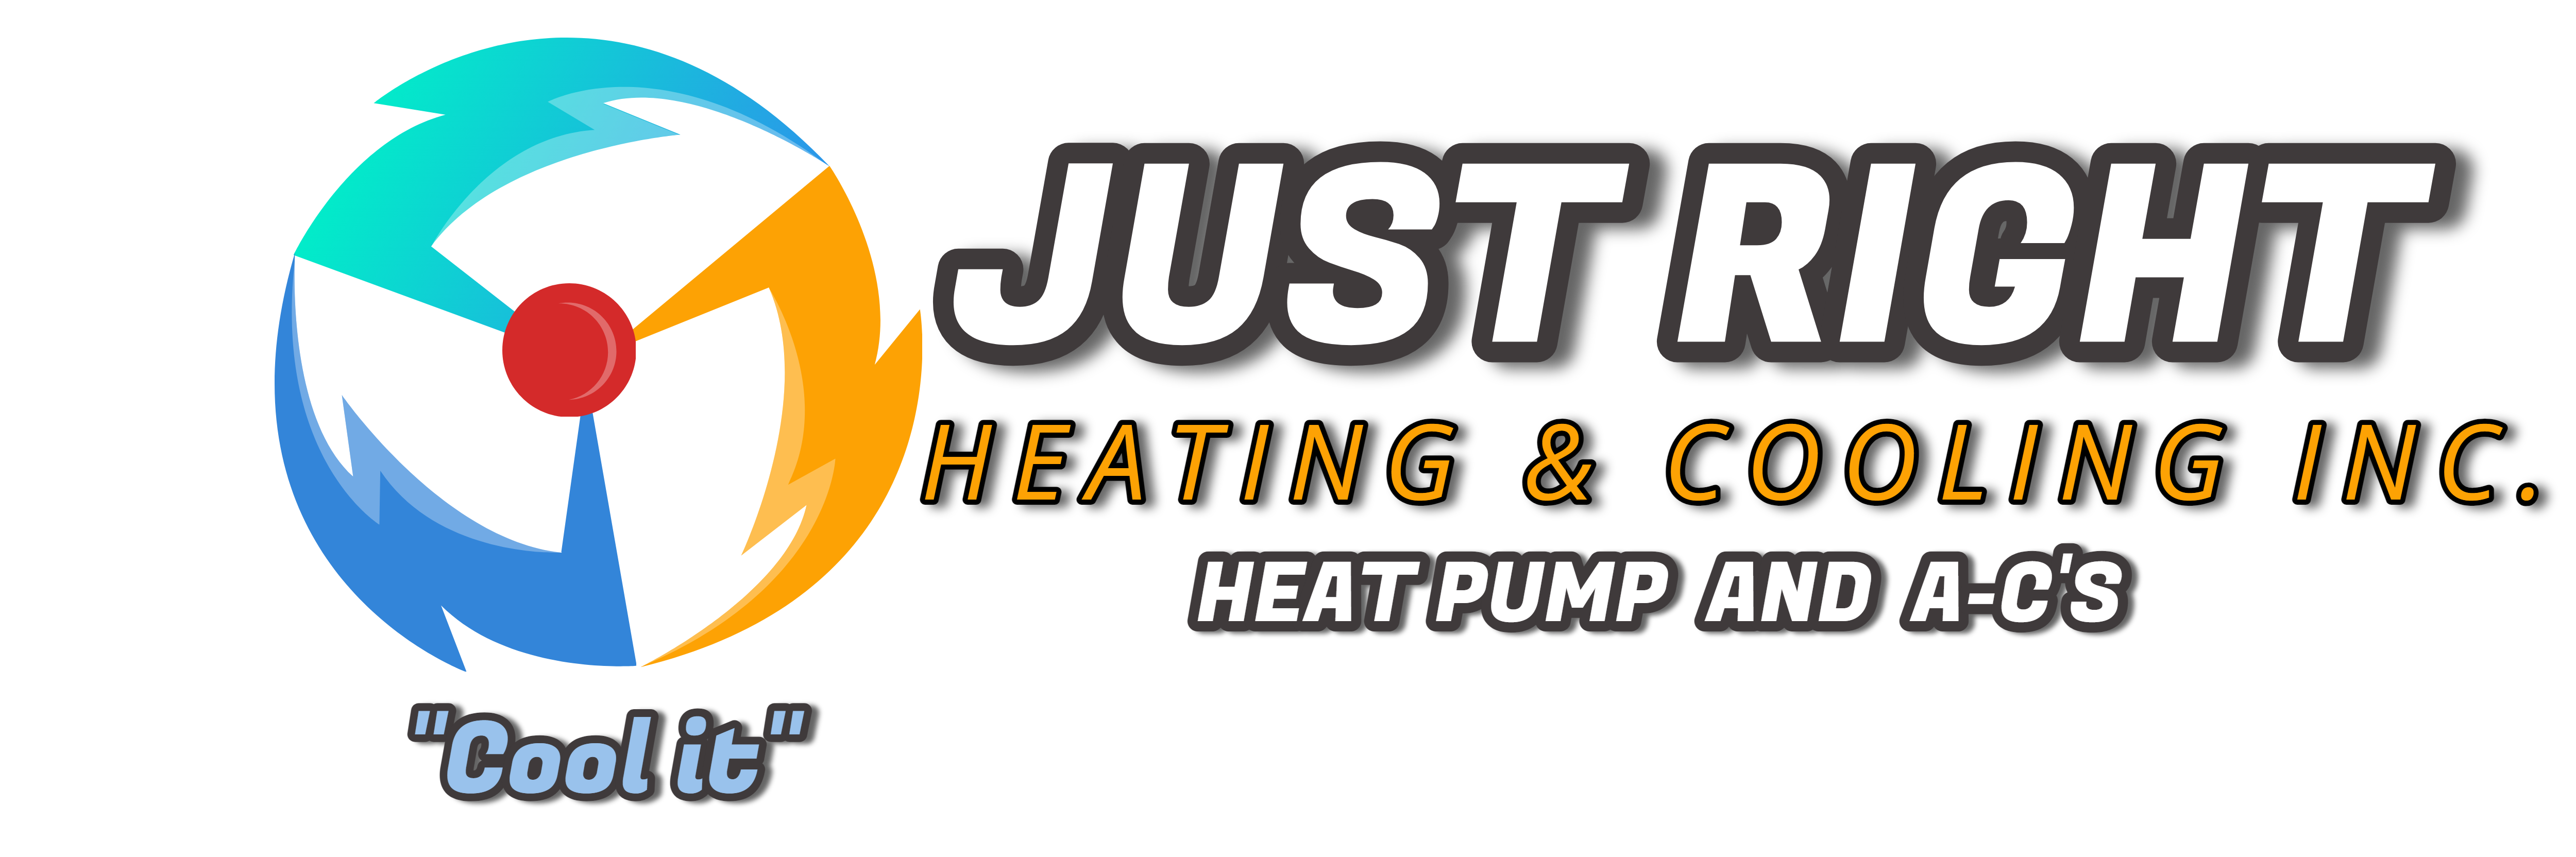 Just Right Heating and Cooling Inc.